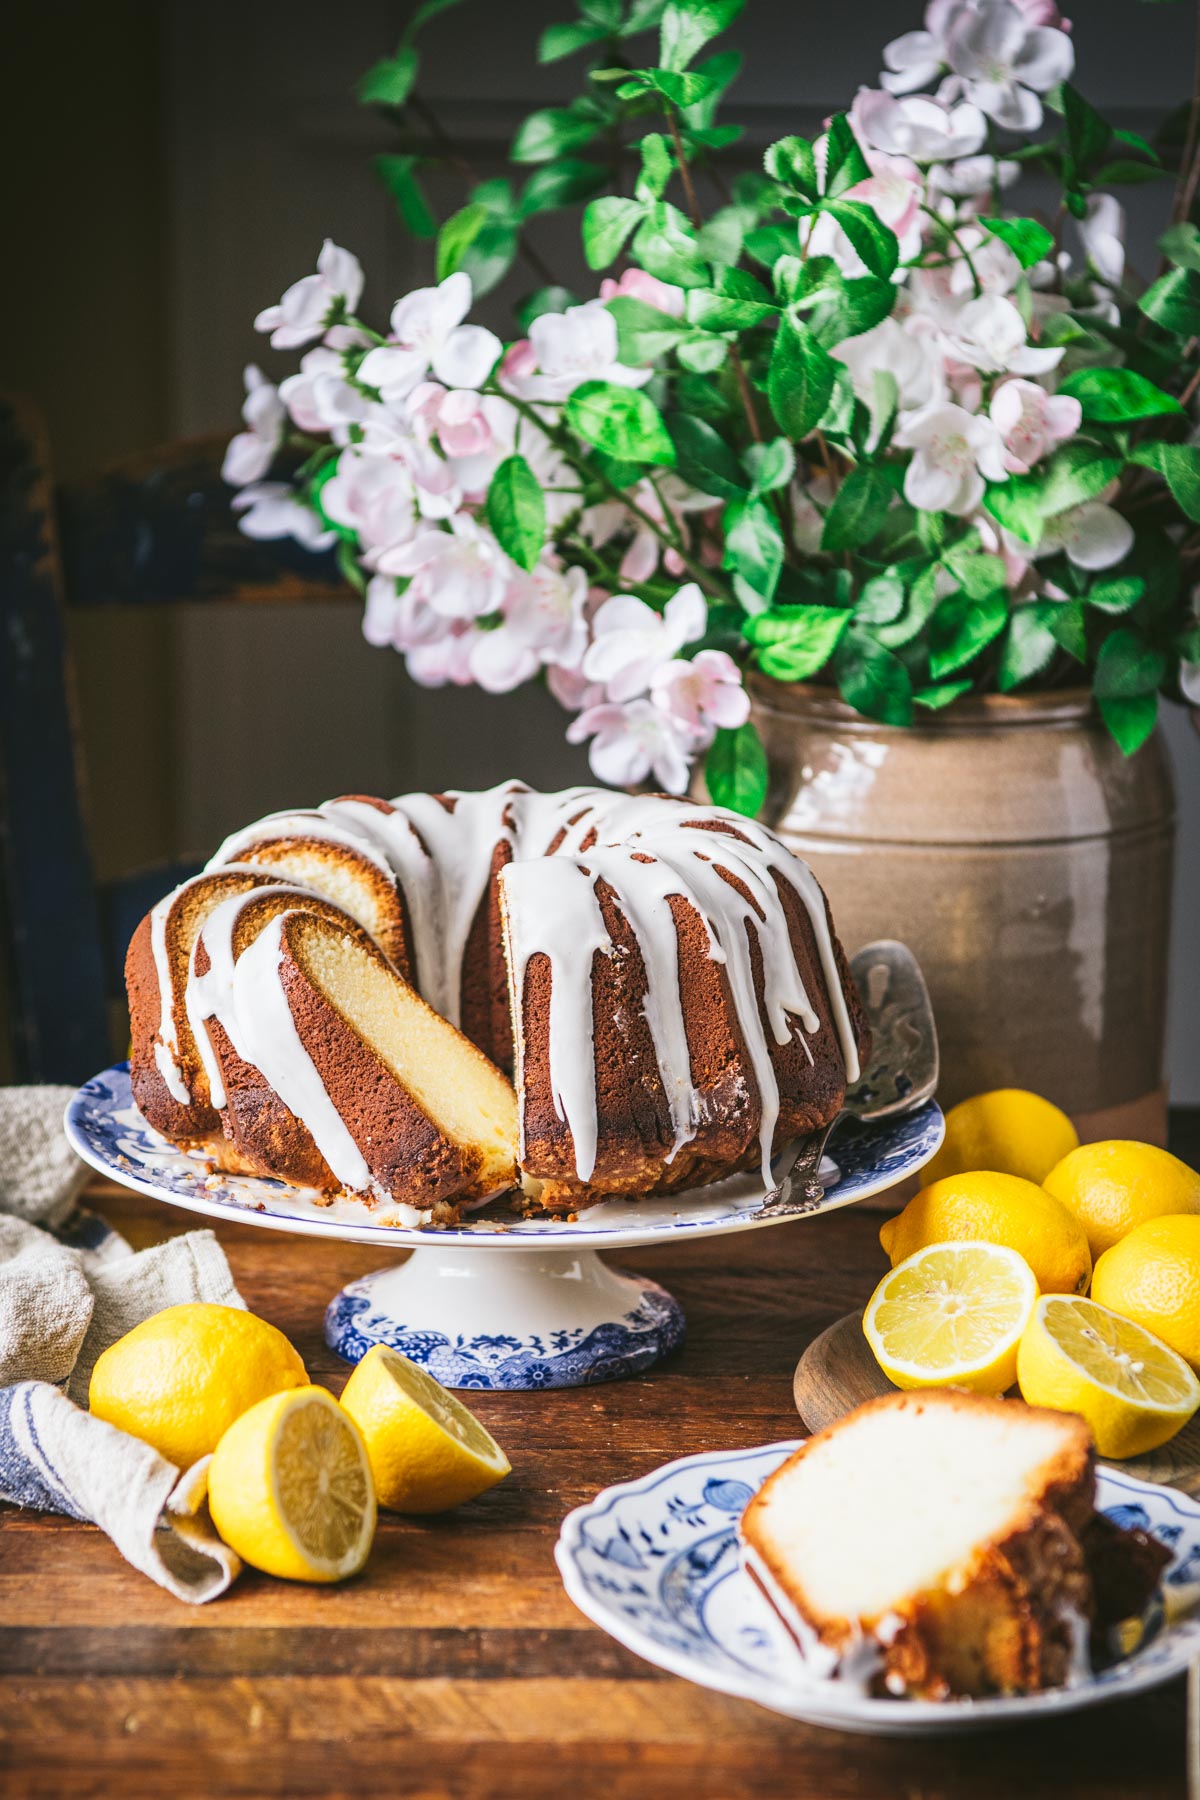 Side shot of lemon pound cake on a wooden table with flowers in the background.